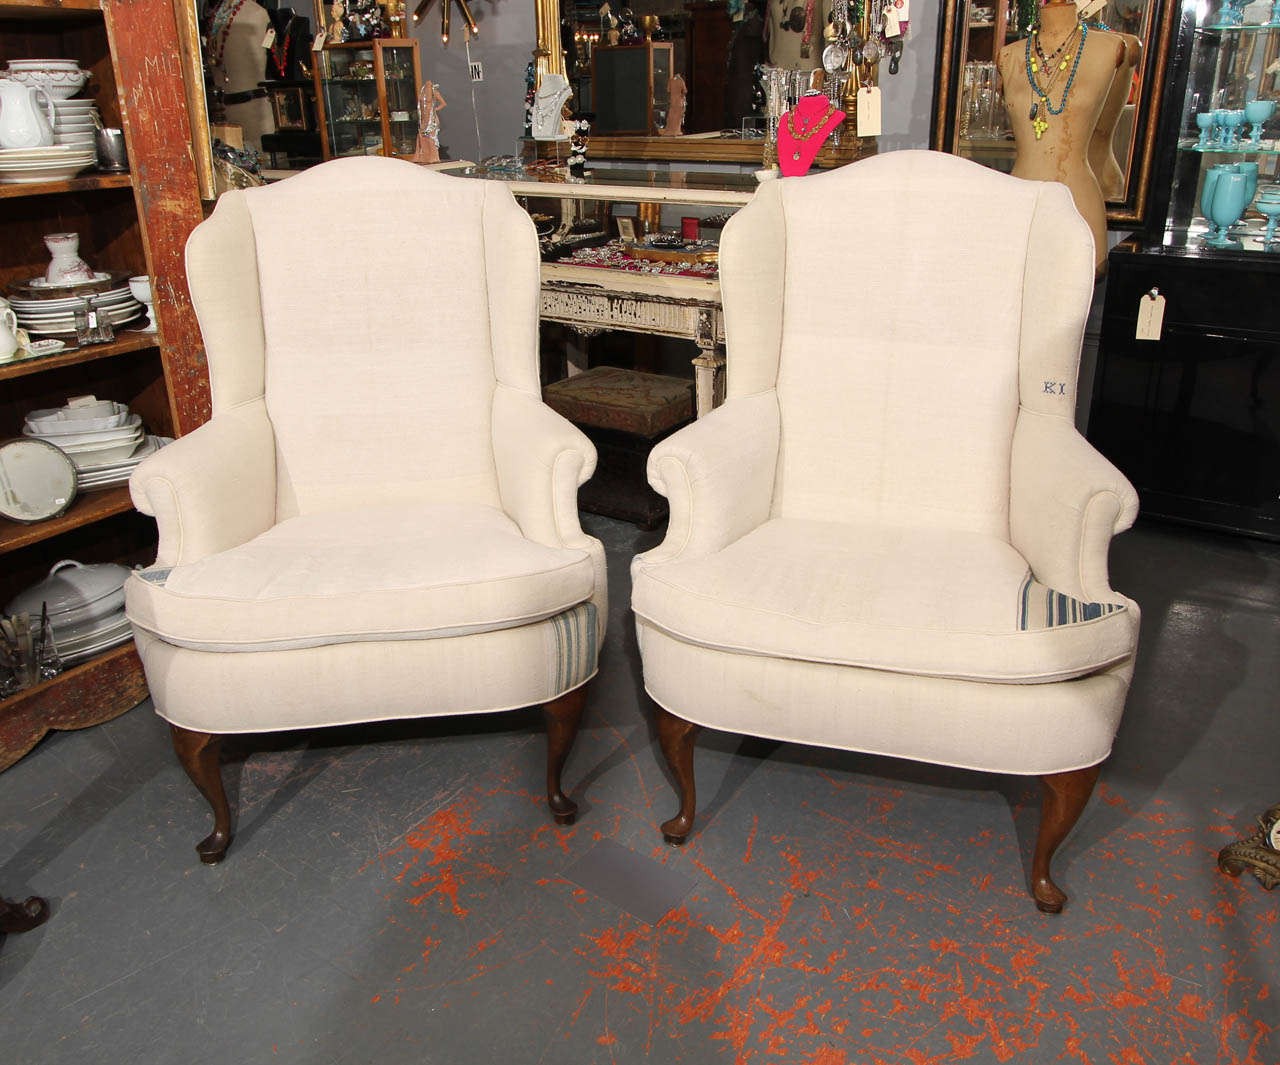 Comfortable pair of wingback chairs reupholstered in linen and ticking with monograms and original repairs. Reversible down filled cushions.